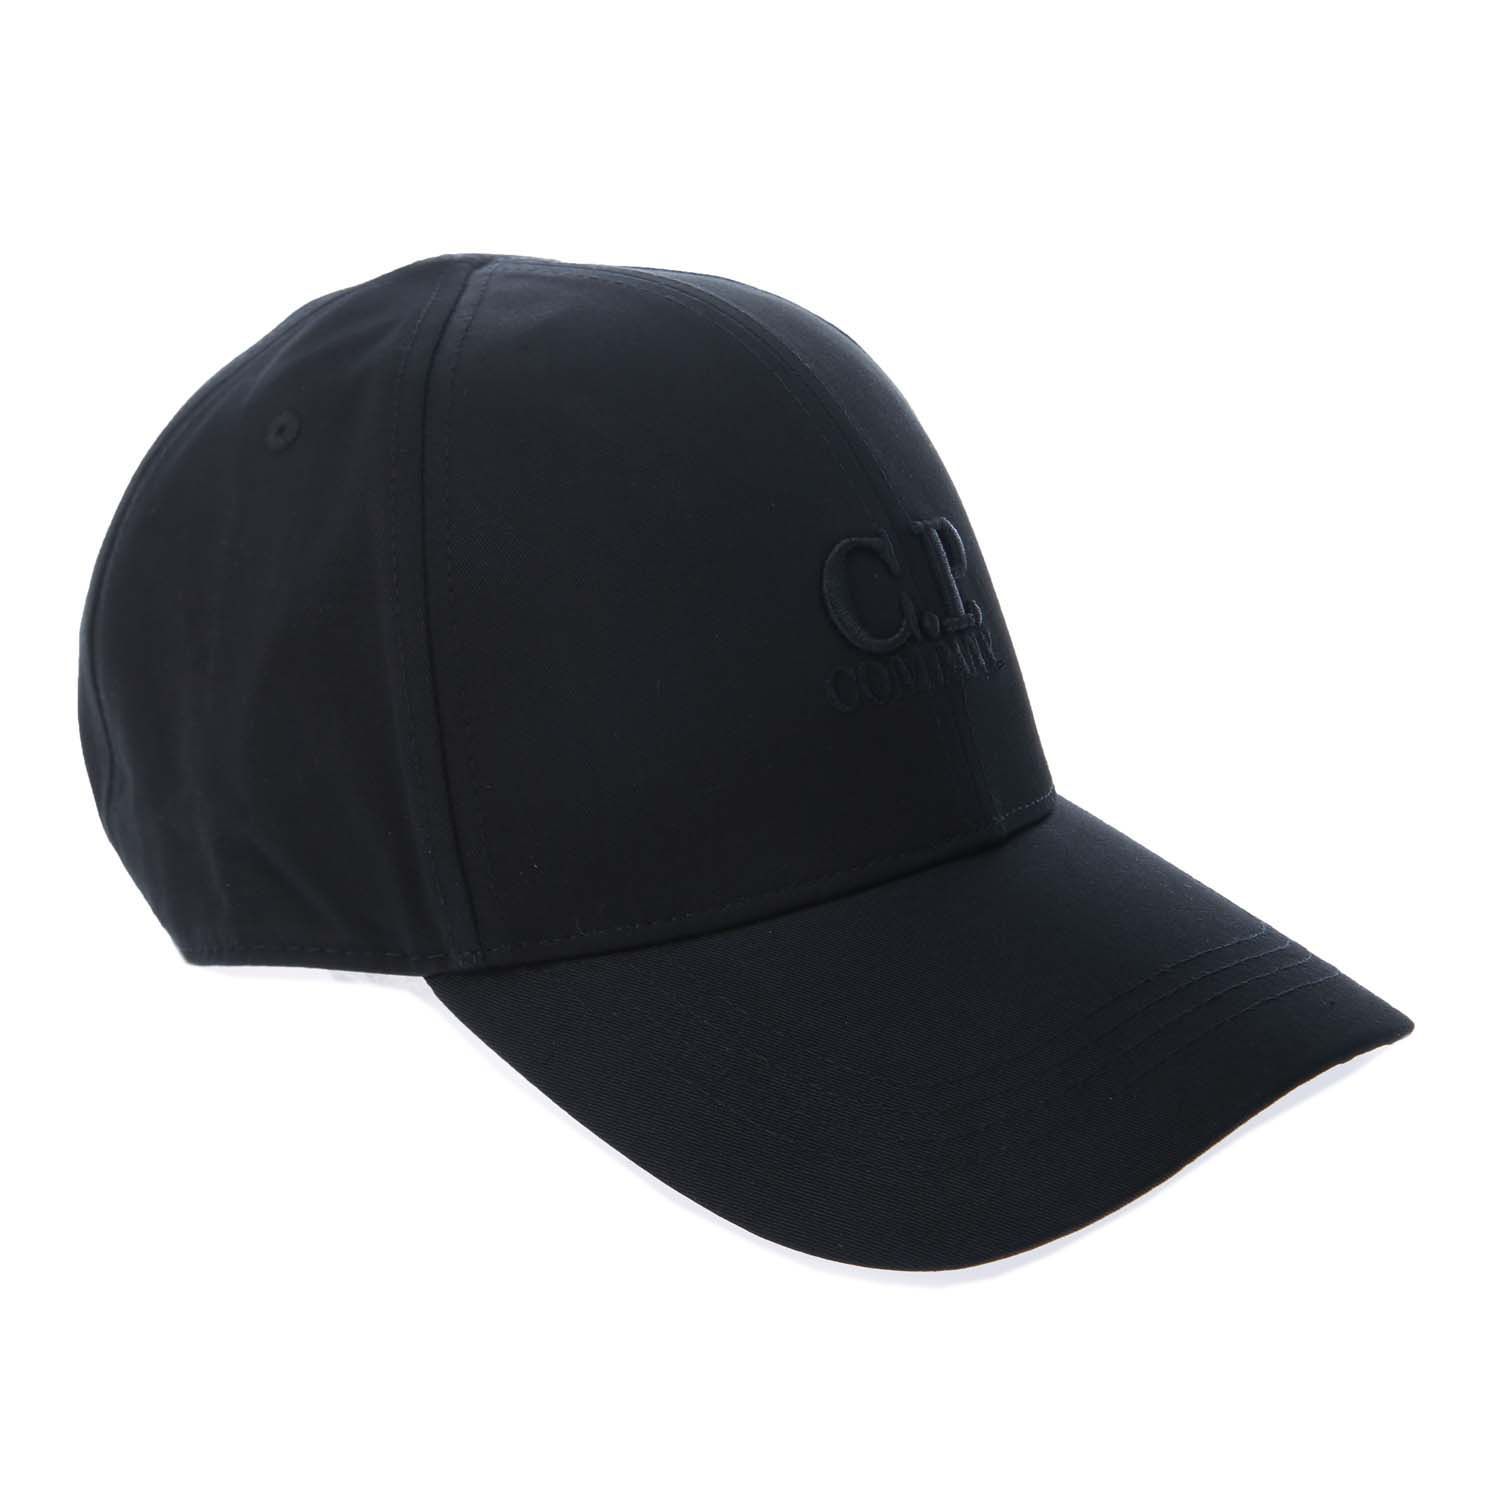 Mens C.P. Company Logo Cap in black.- Adjustable strap.- 6 panel construction.- Peak and the brands signature logo embroidered to the centre front.- Cotton twill.- 100% Cotton. Machine washable.- Ref: 12CMAC015A999